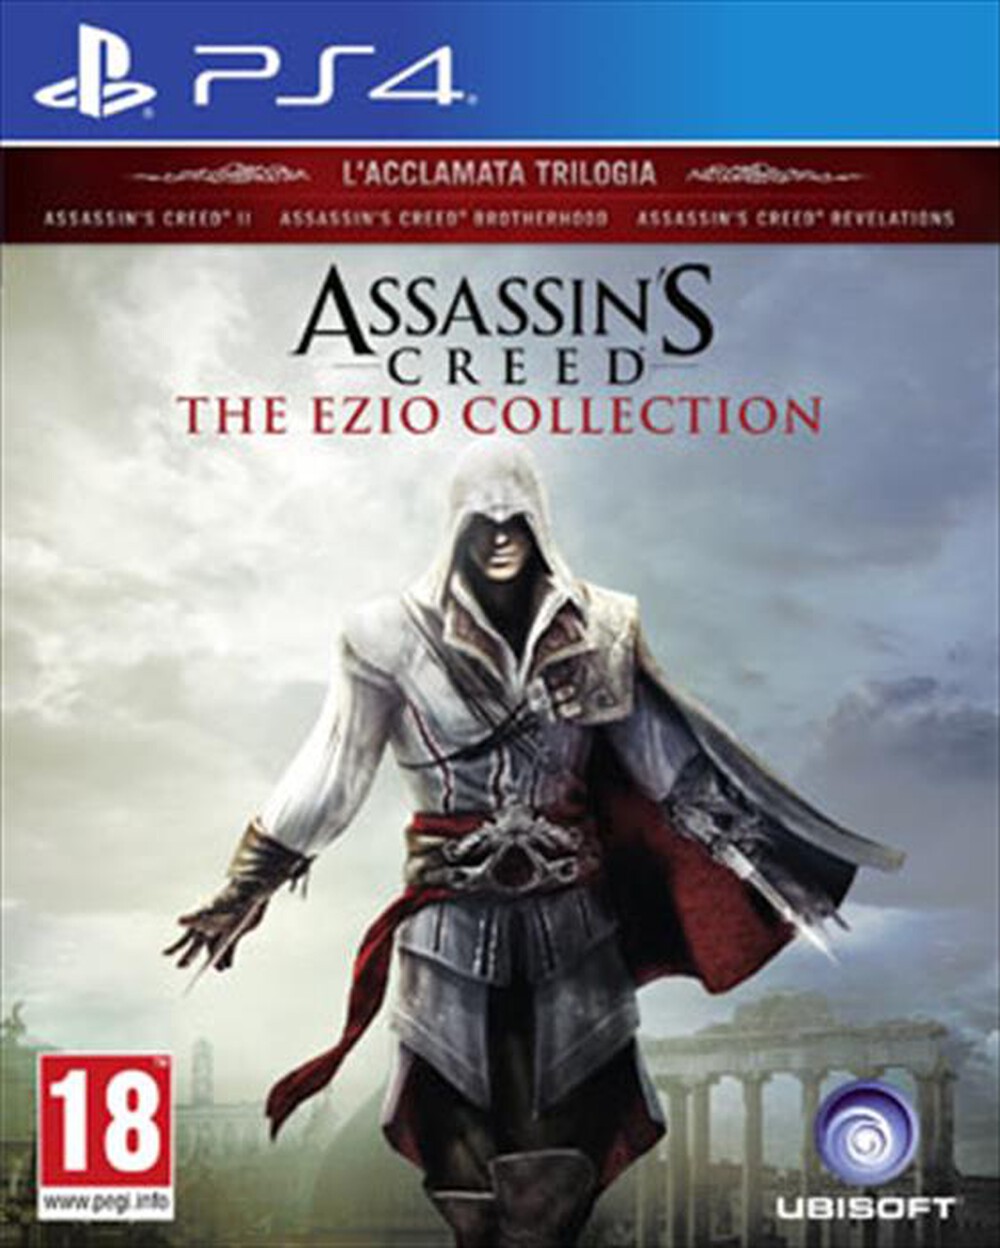 "UBISOFT - Assassin's Creed - The Ezio Collection PS4 - "